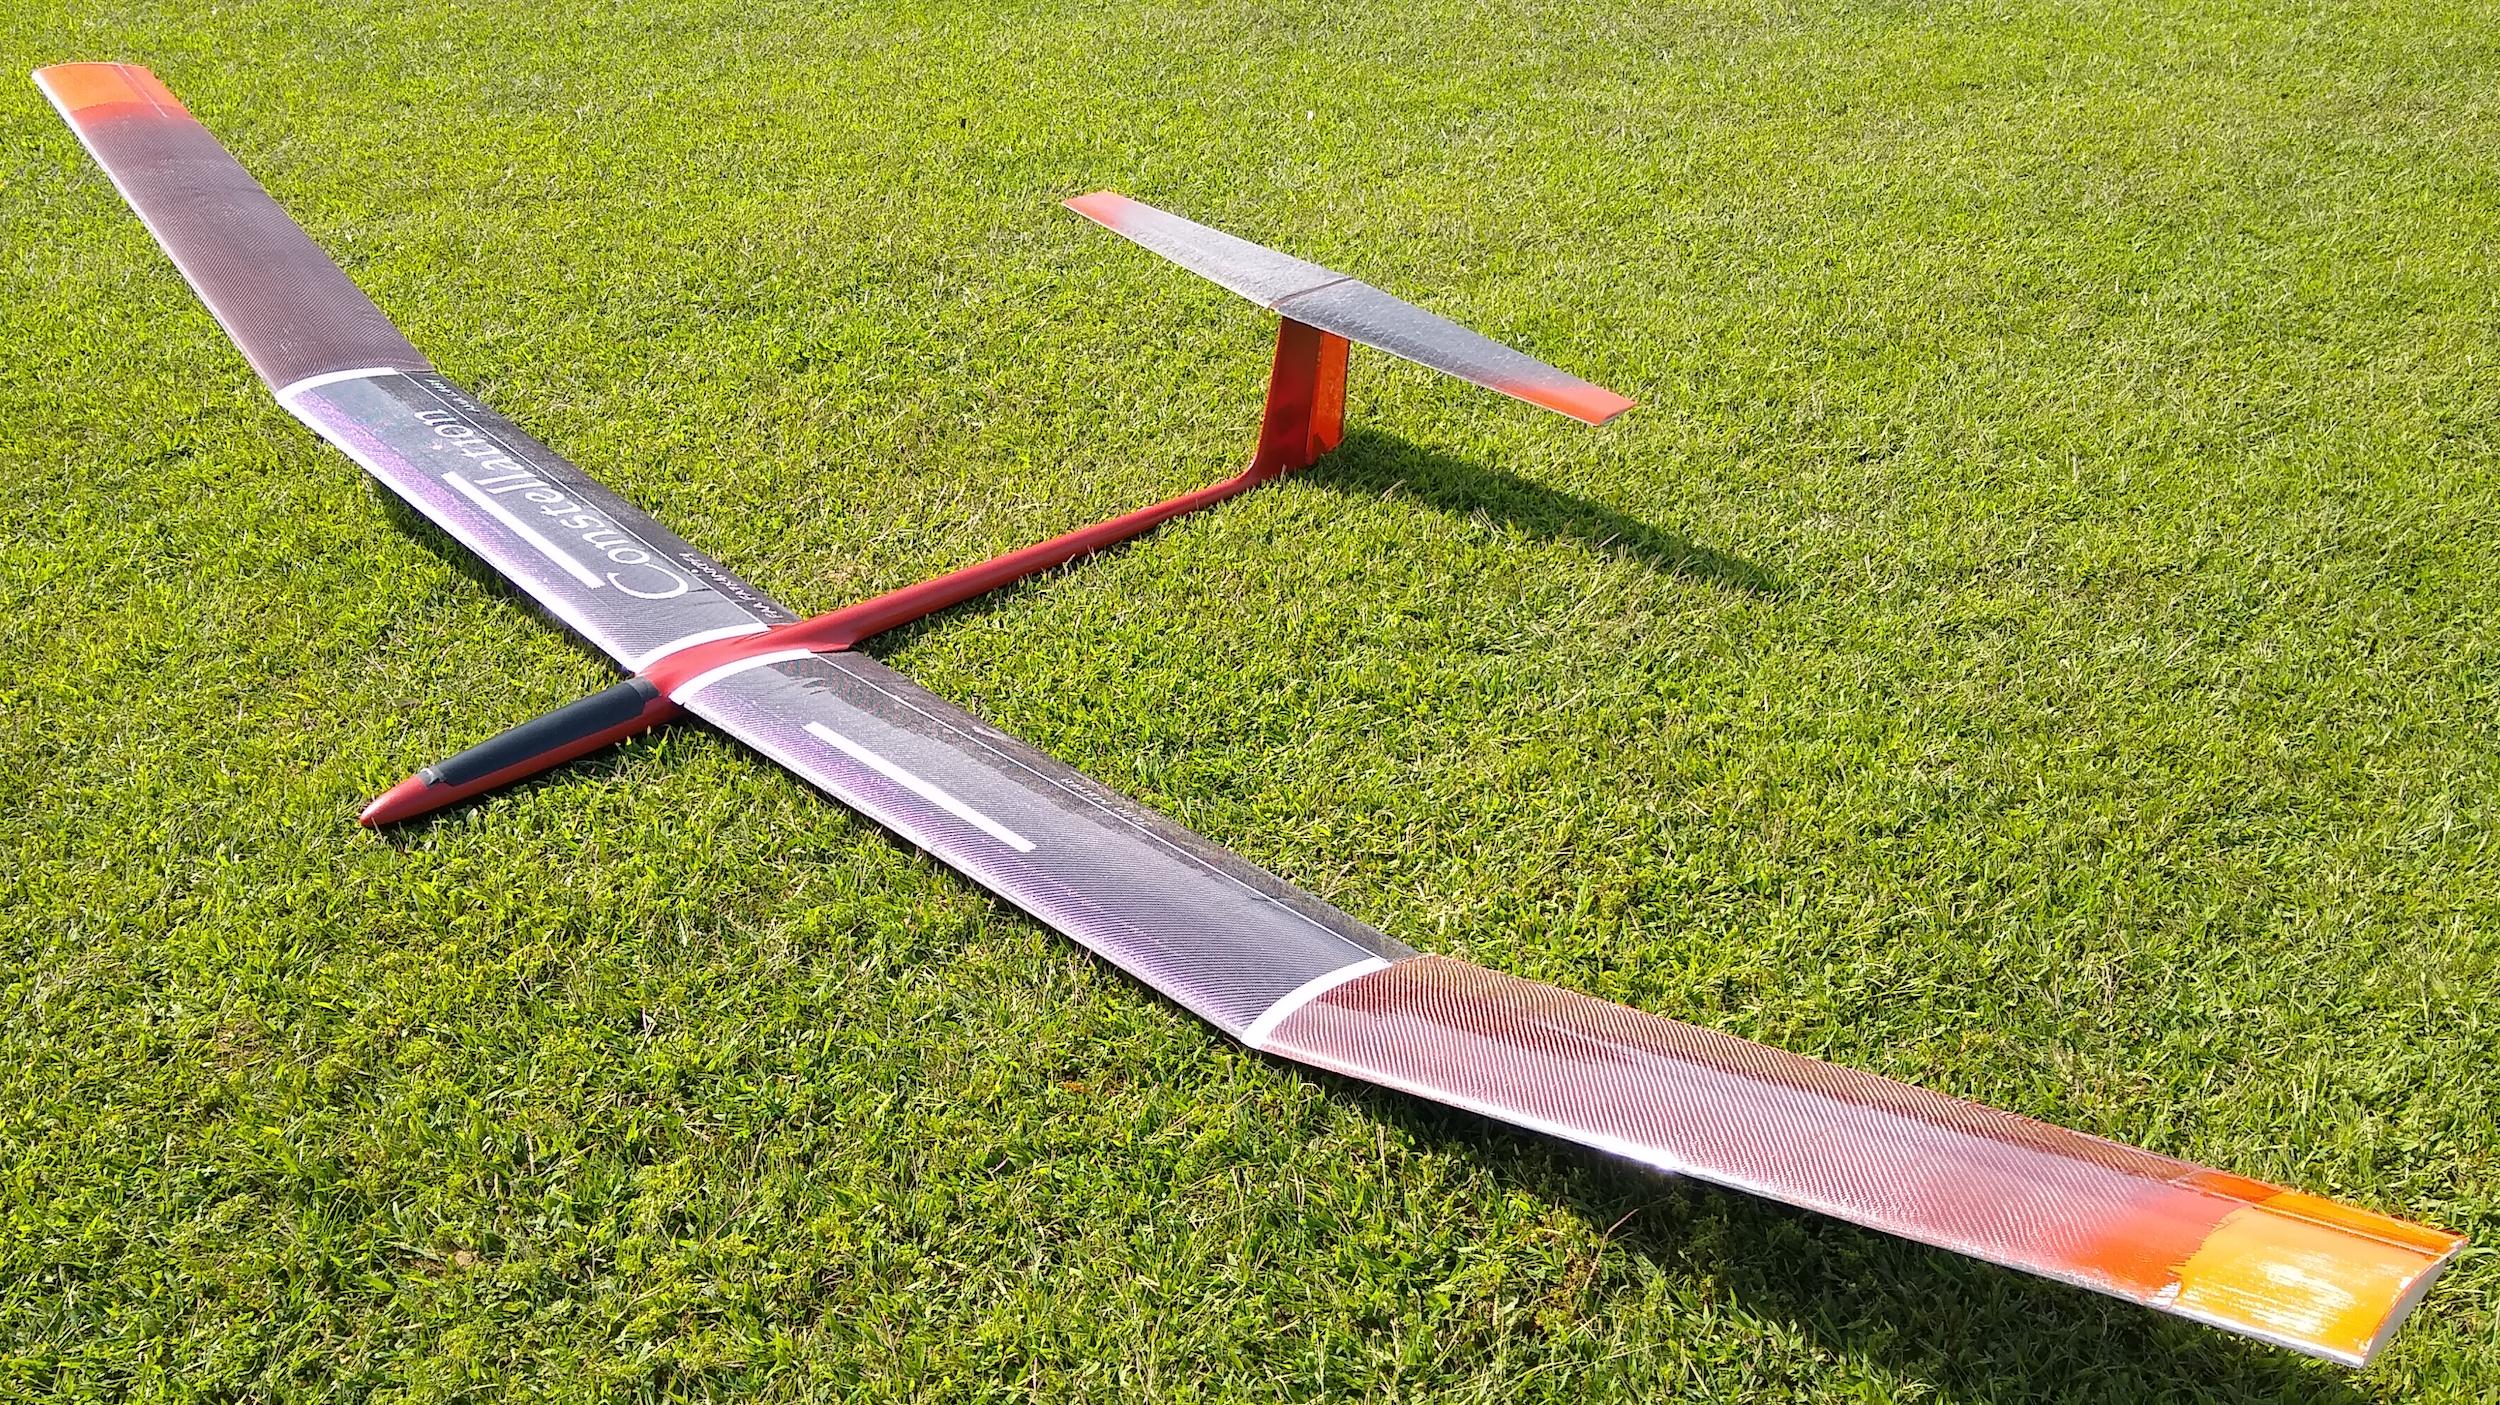 Minimum Rc Glider: Preparing and Launching Techniques for Your RC Glider